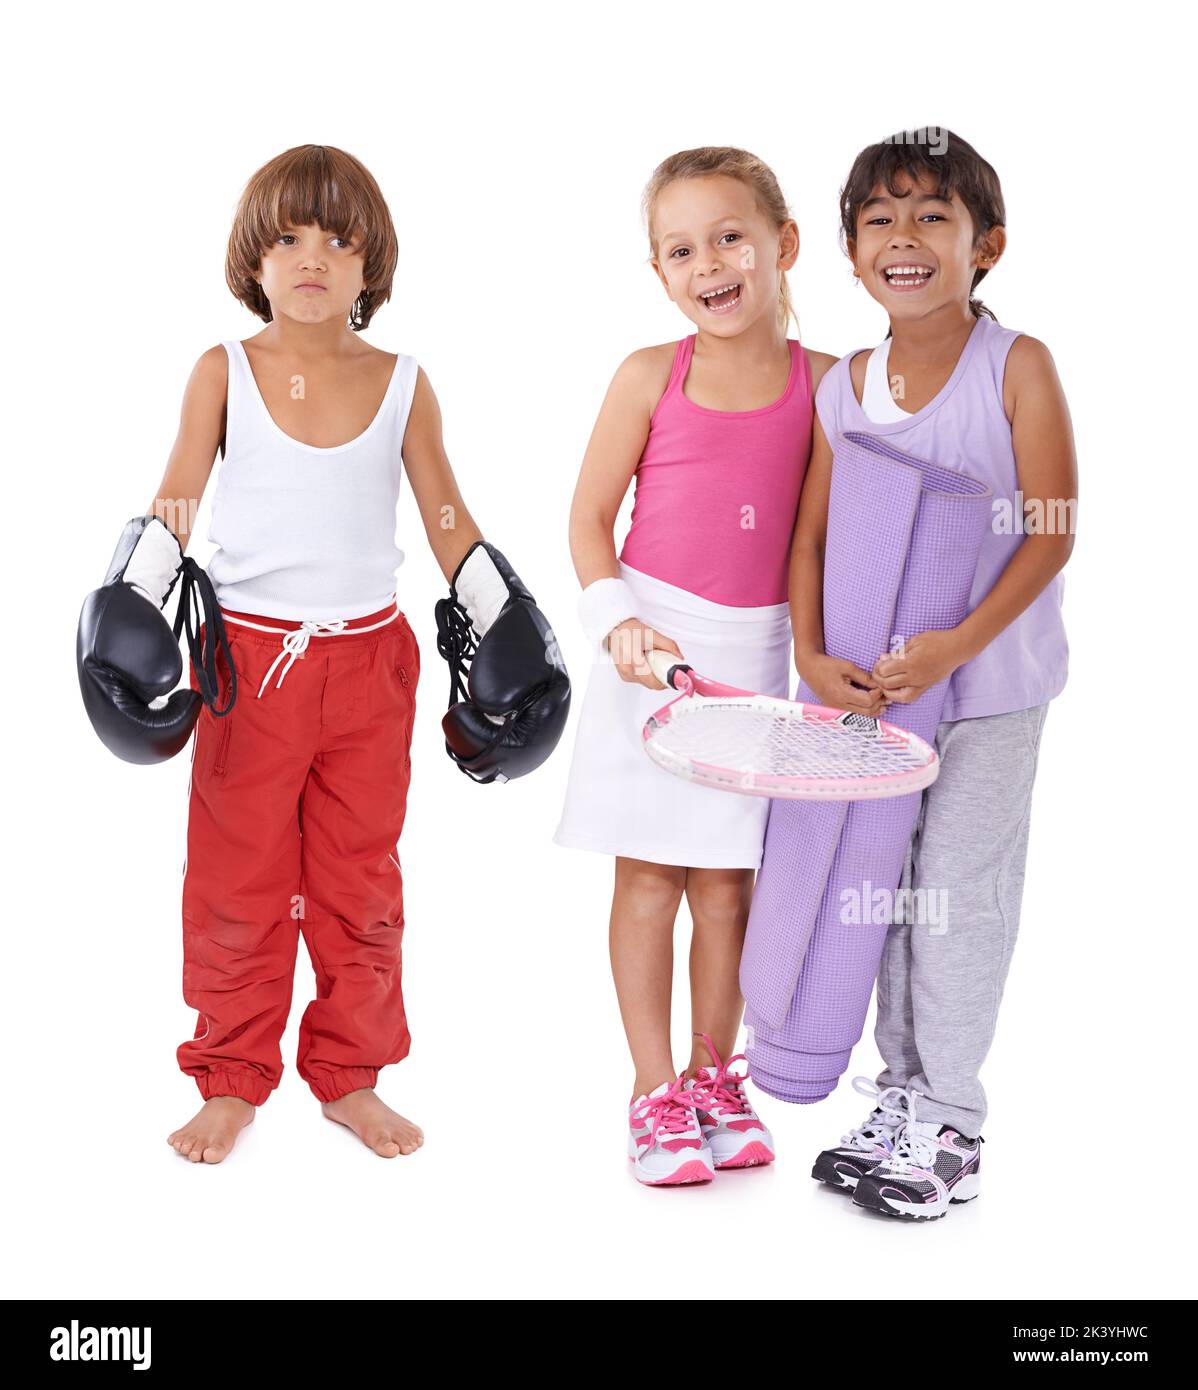 They all have an individual passion. A group of three children in various sports attire. Stock Photo